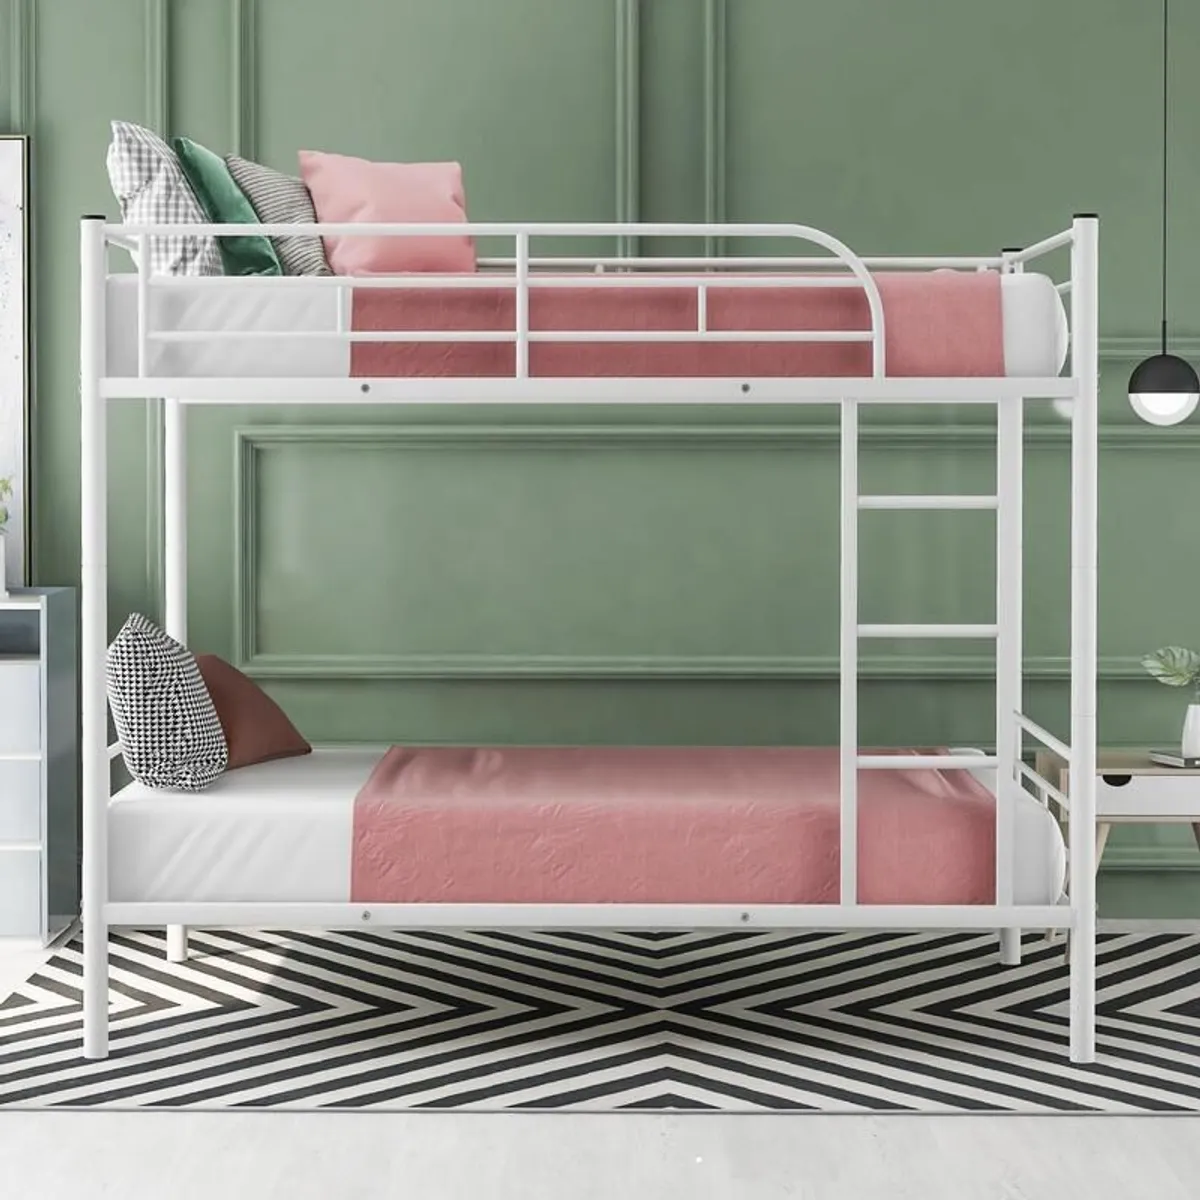 Metal Bunk Beds On Special Offer !